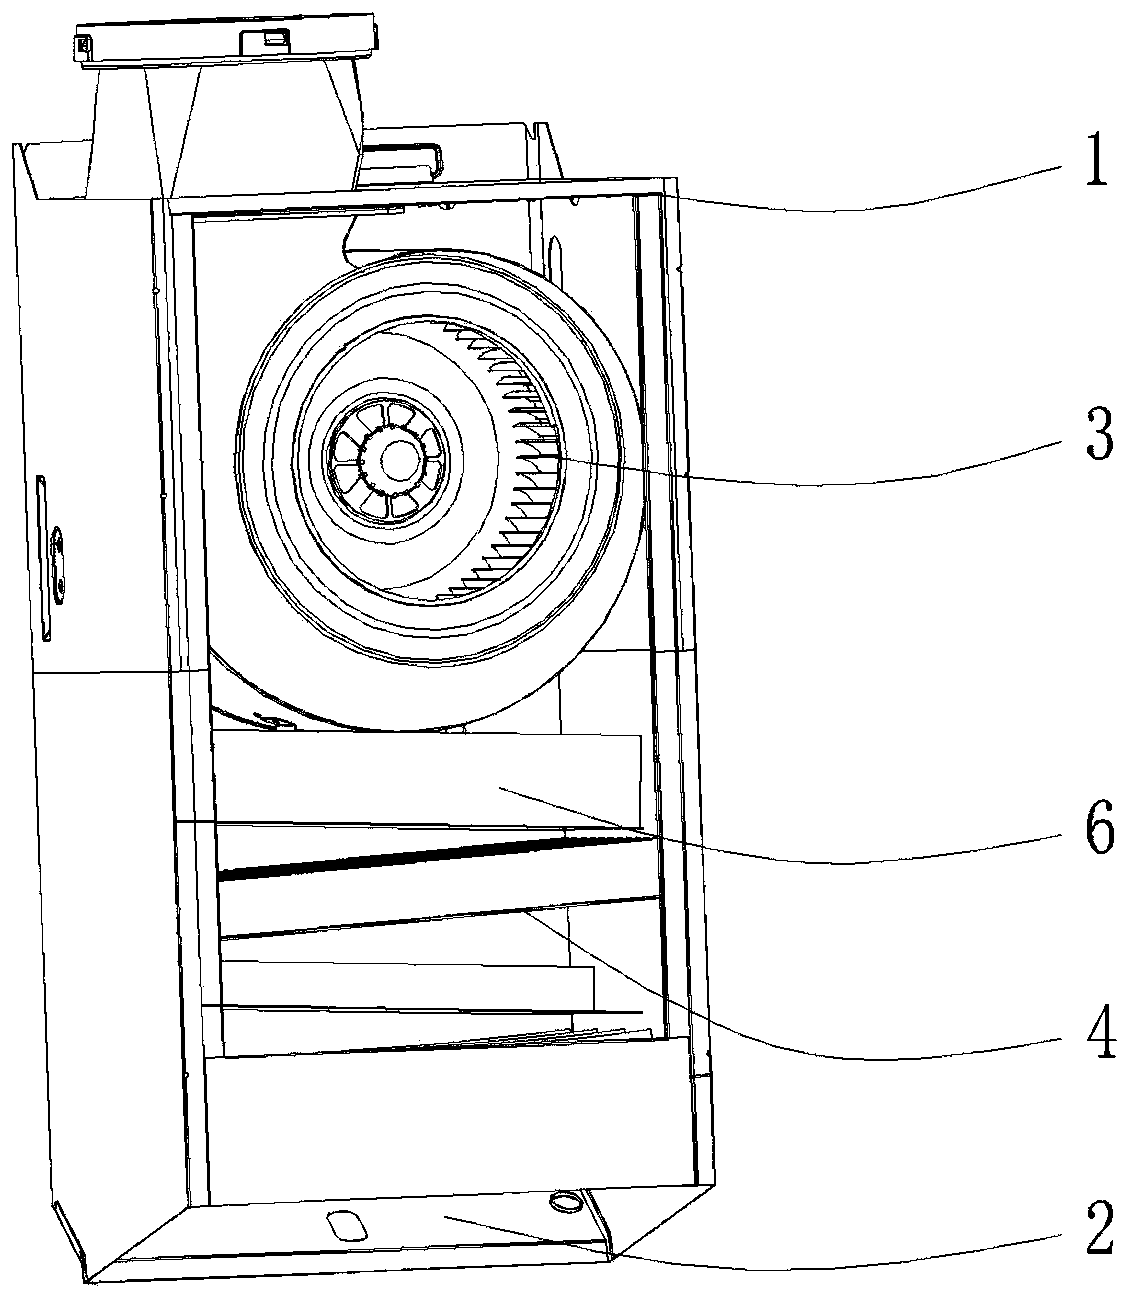 Oil filtering and noise reducing structure of range hood